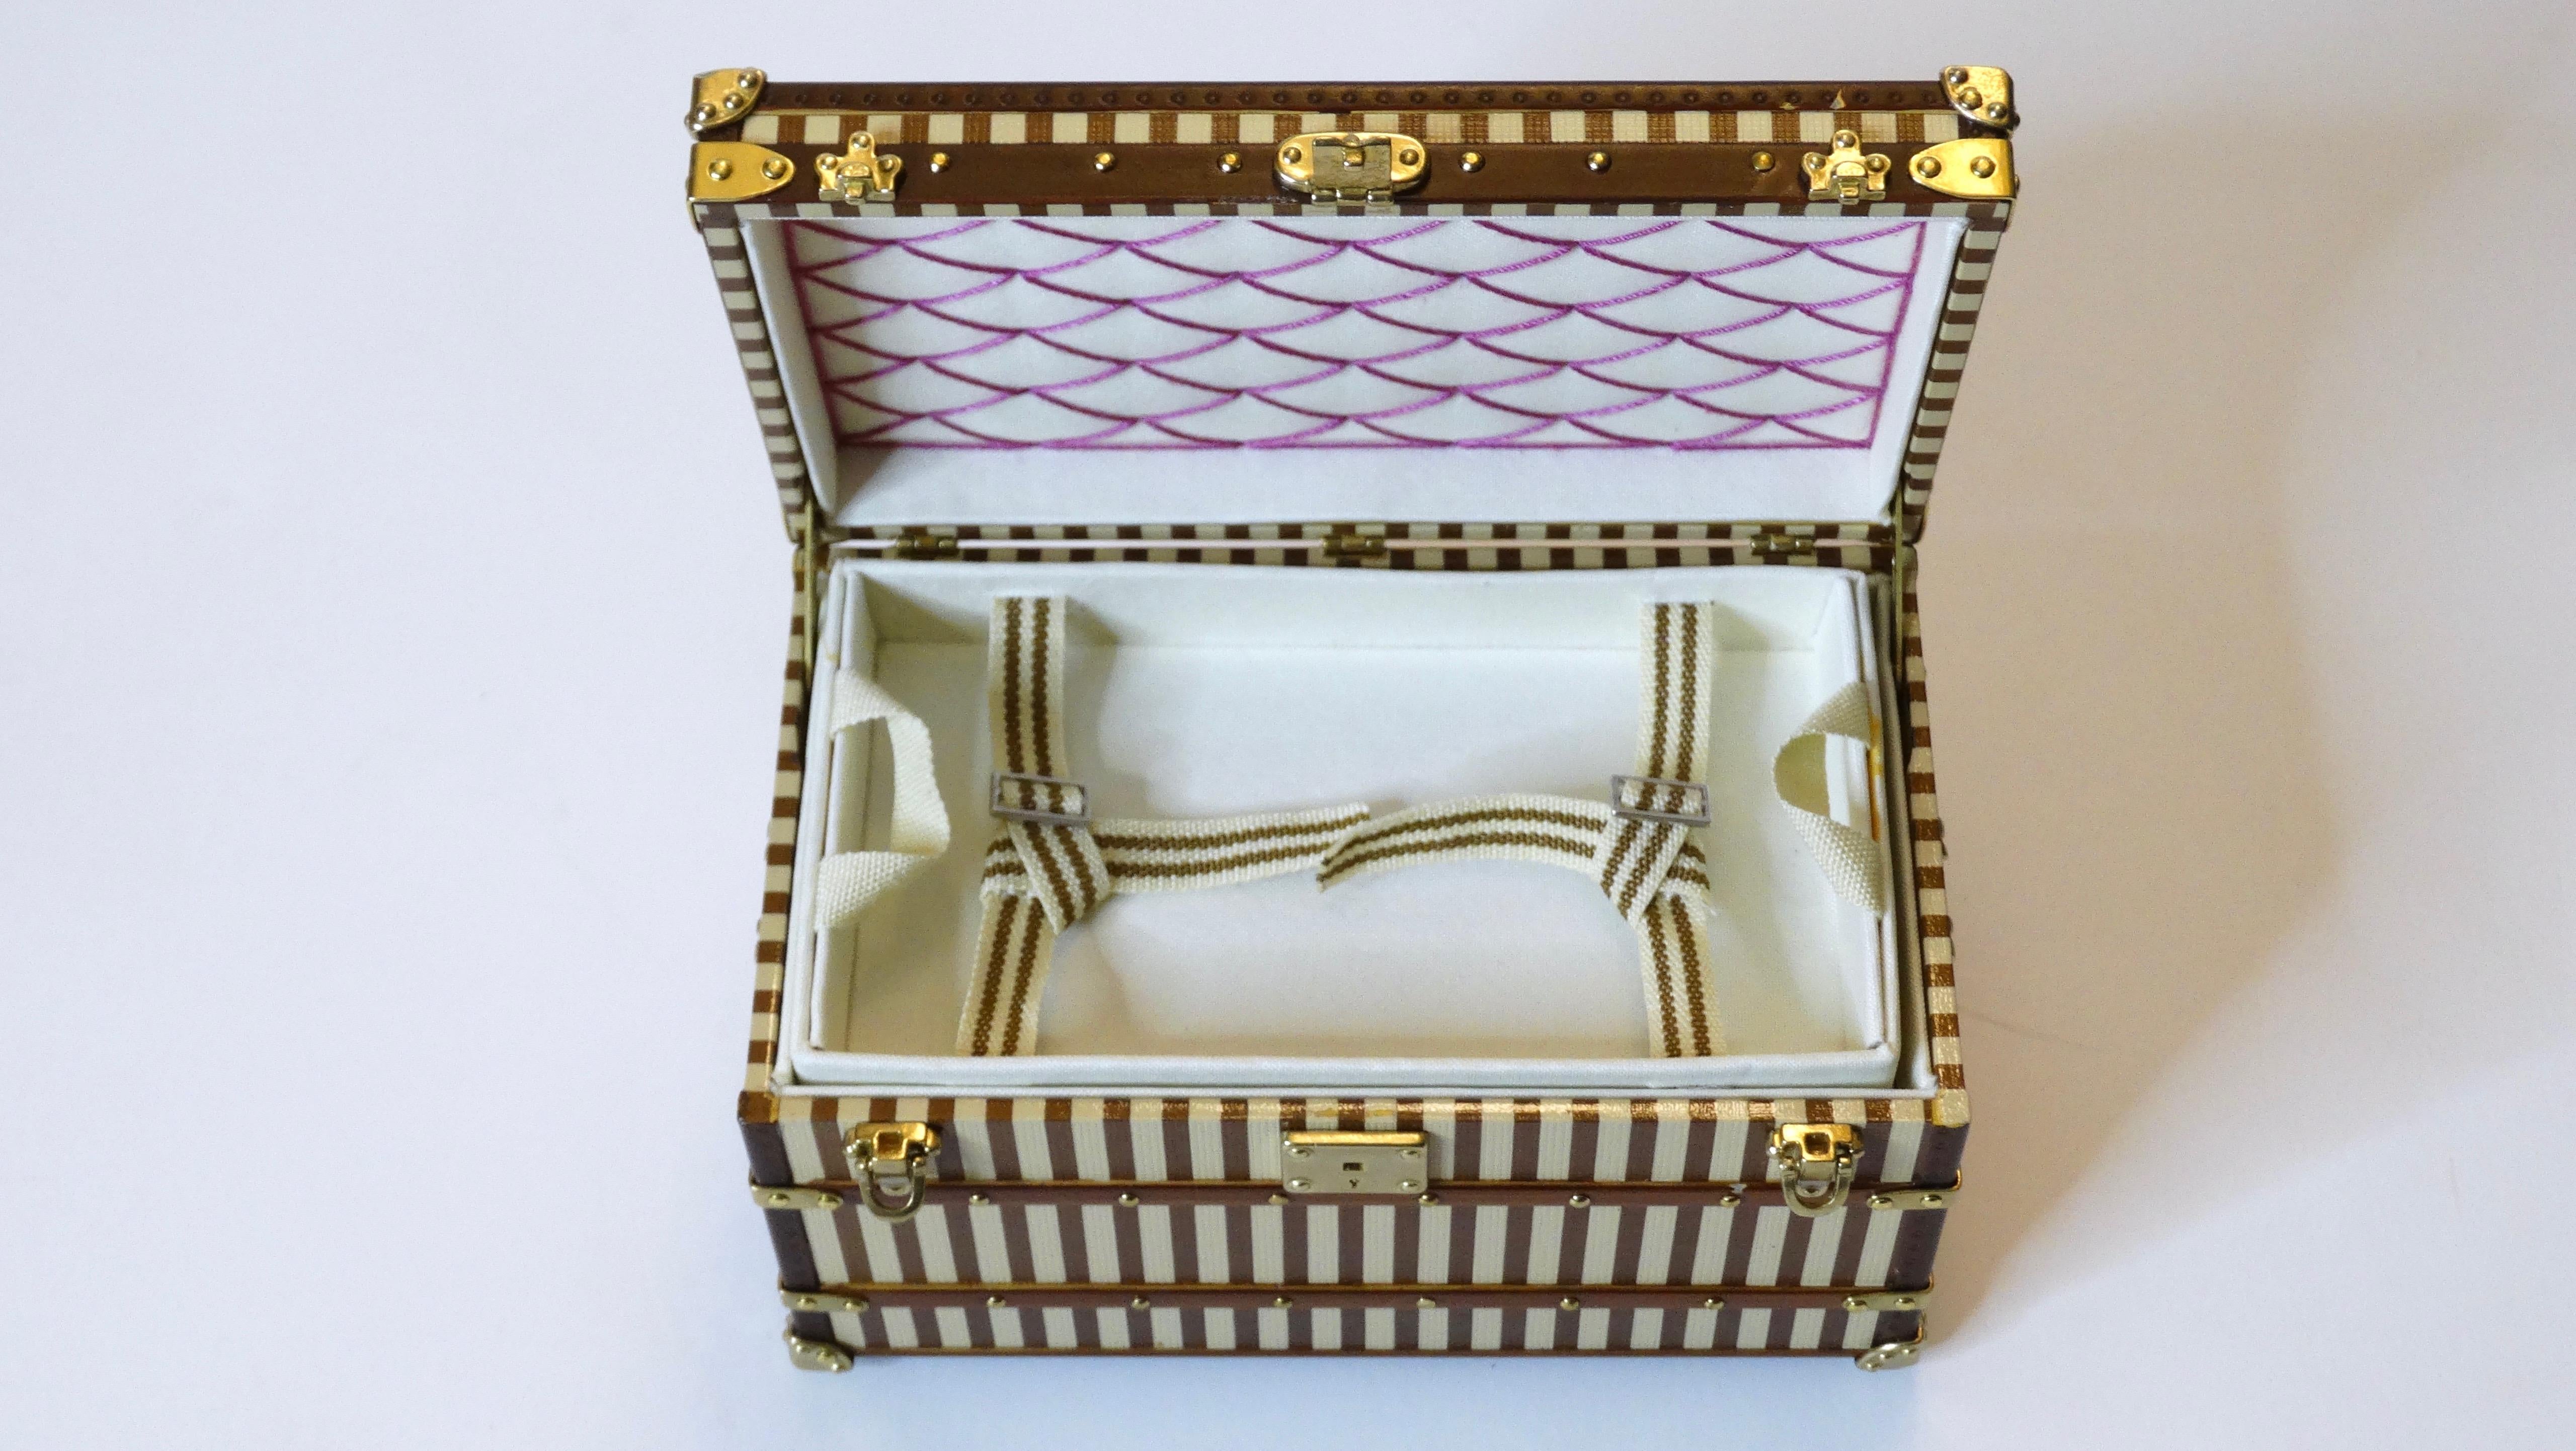 Vanity Alert, your vanity is missing this mini courrier trunk jewelry box from Louis Vuitton.  Created by Louis Vuitton as a VIP novelty gift. The mini courrier trunk is a 1/7 th replica of an original men's trunk from 1888 and sheathed in